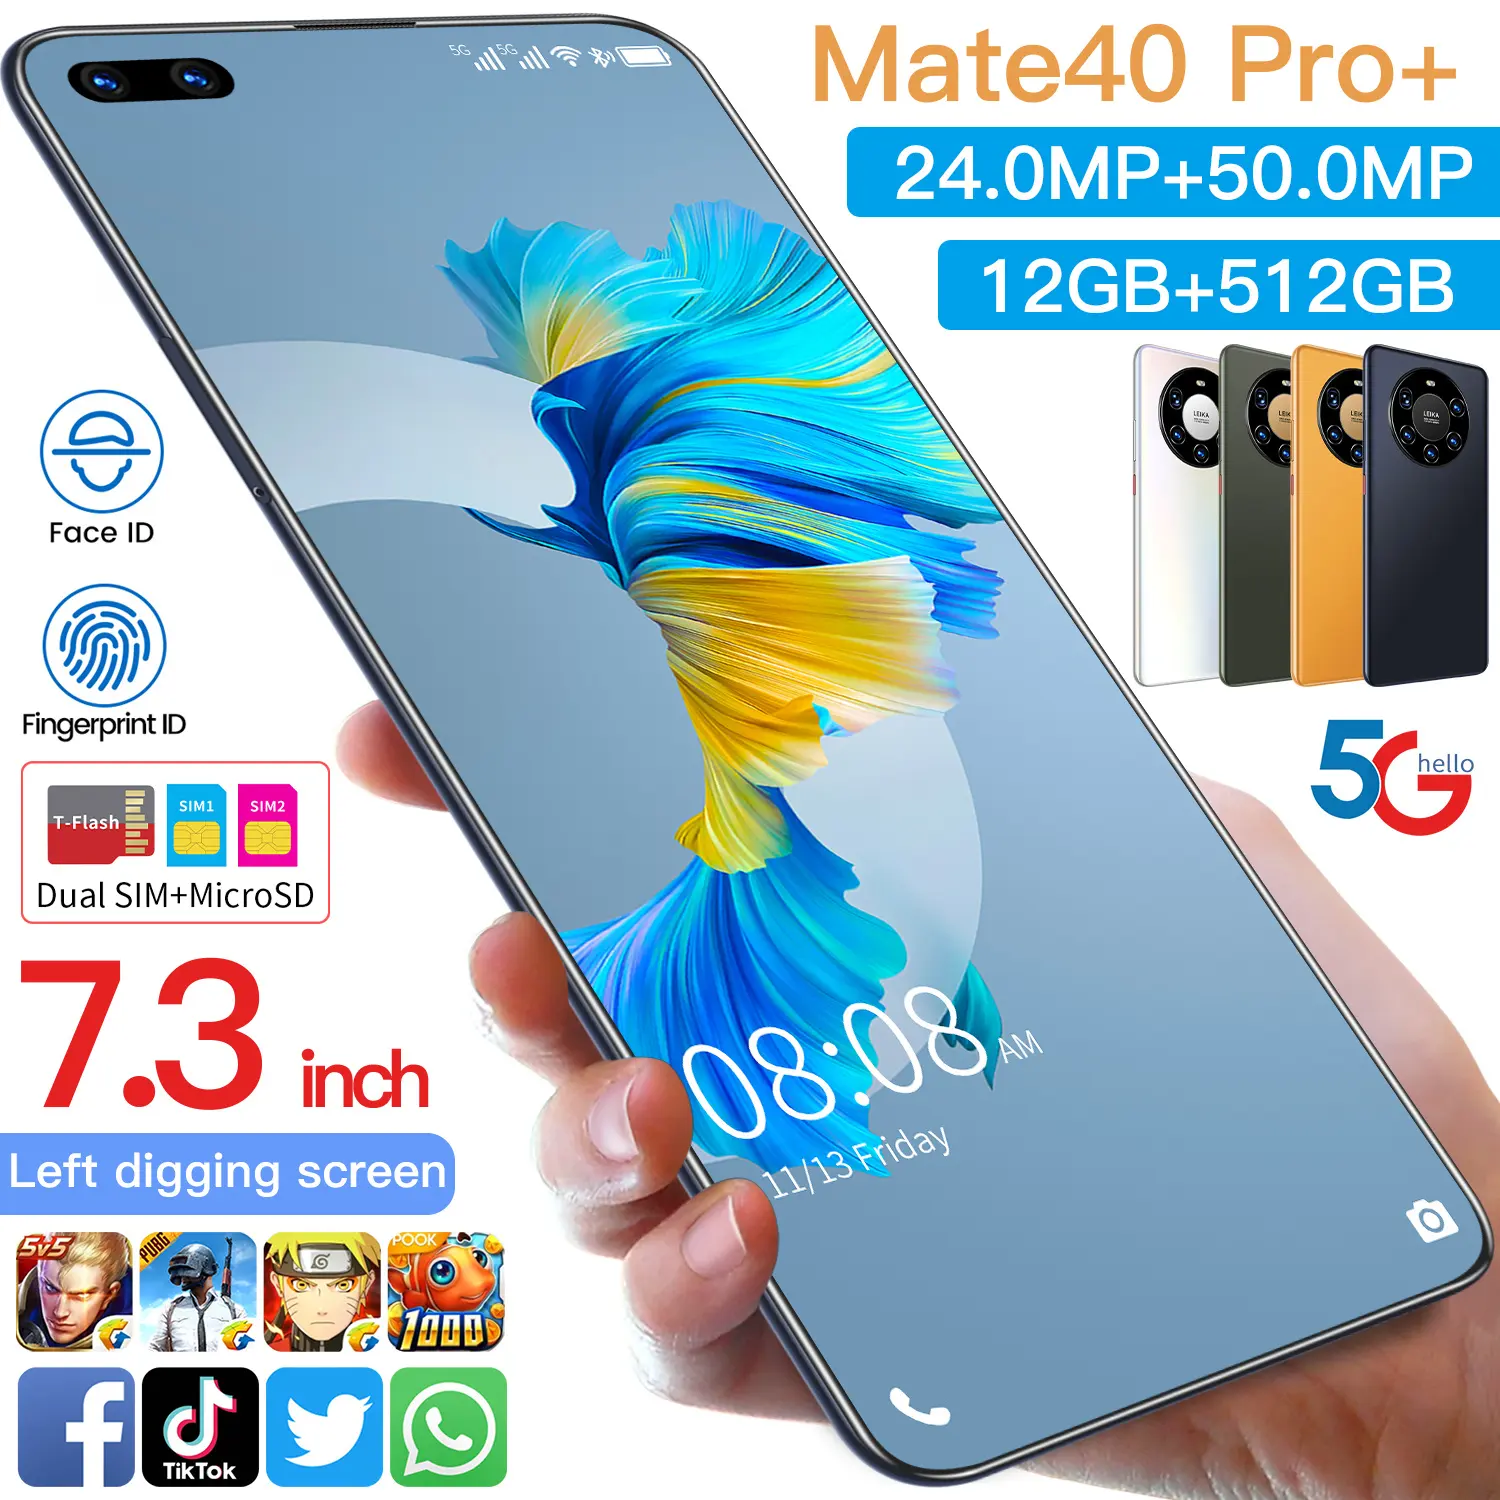 2022 Global version Original Mate 40 Pro+ 12gb+512gb 7.3 Inch smart phone Full Display high quality Mobile Cell Smart Phone